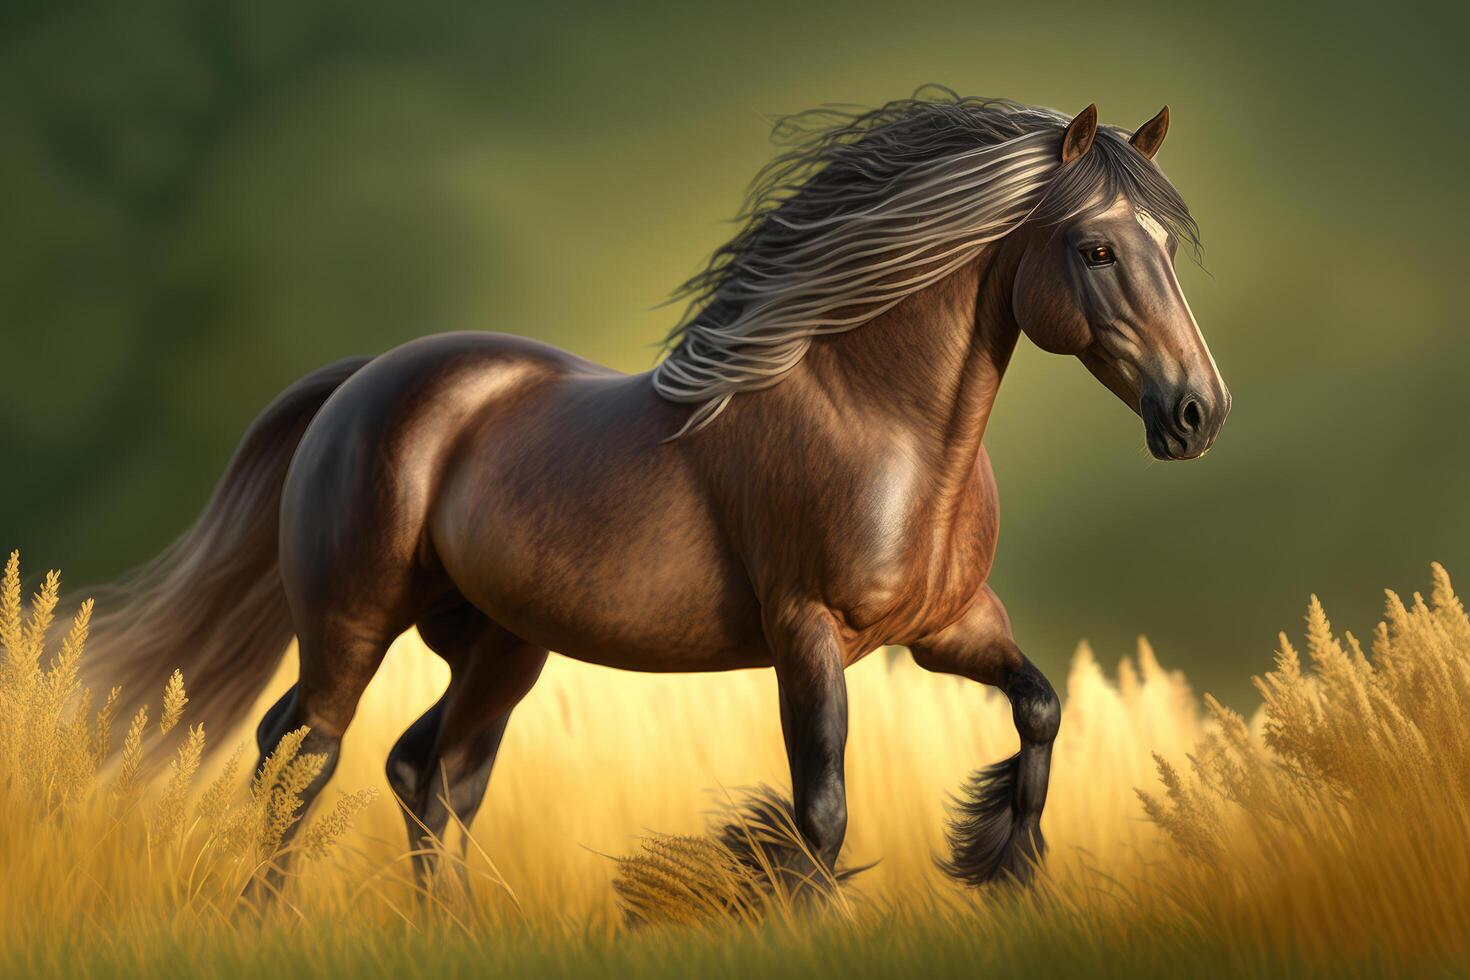 Horse in natural background. Illustration photo